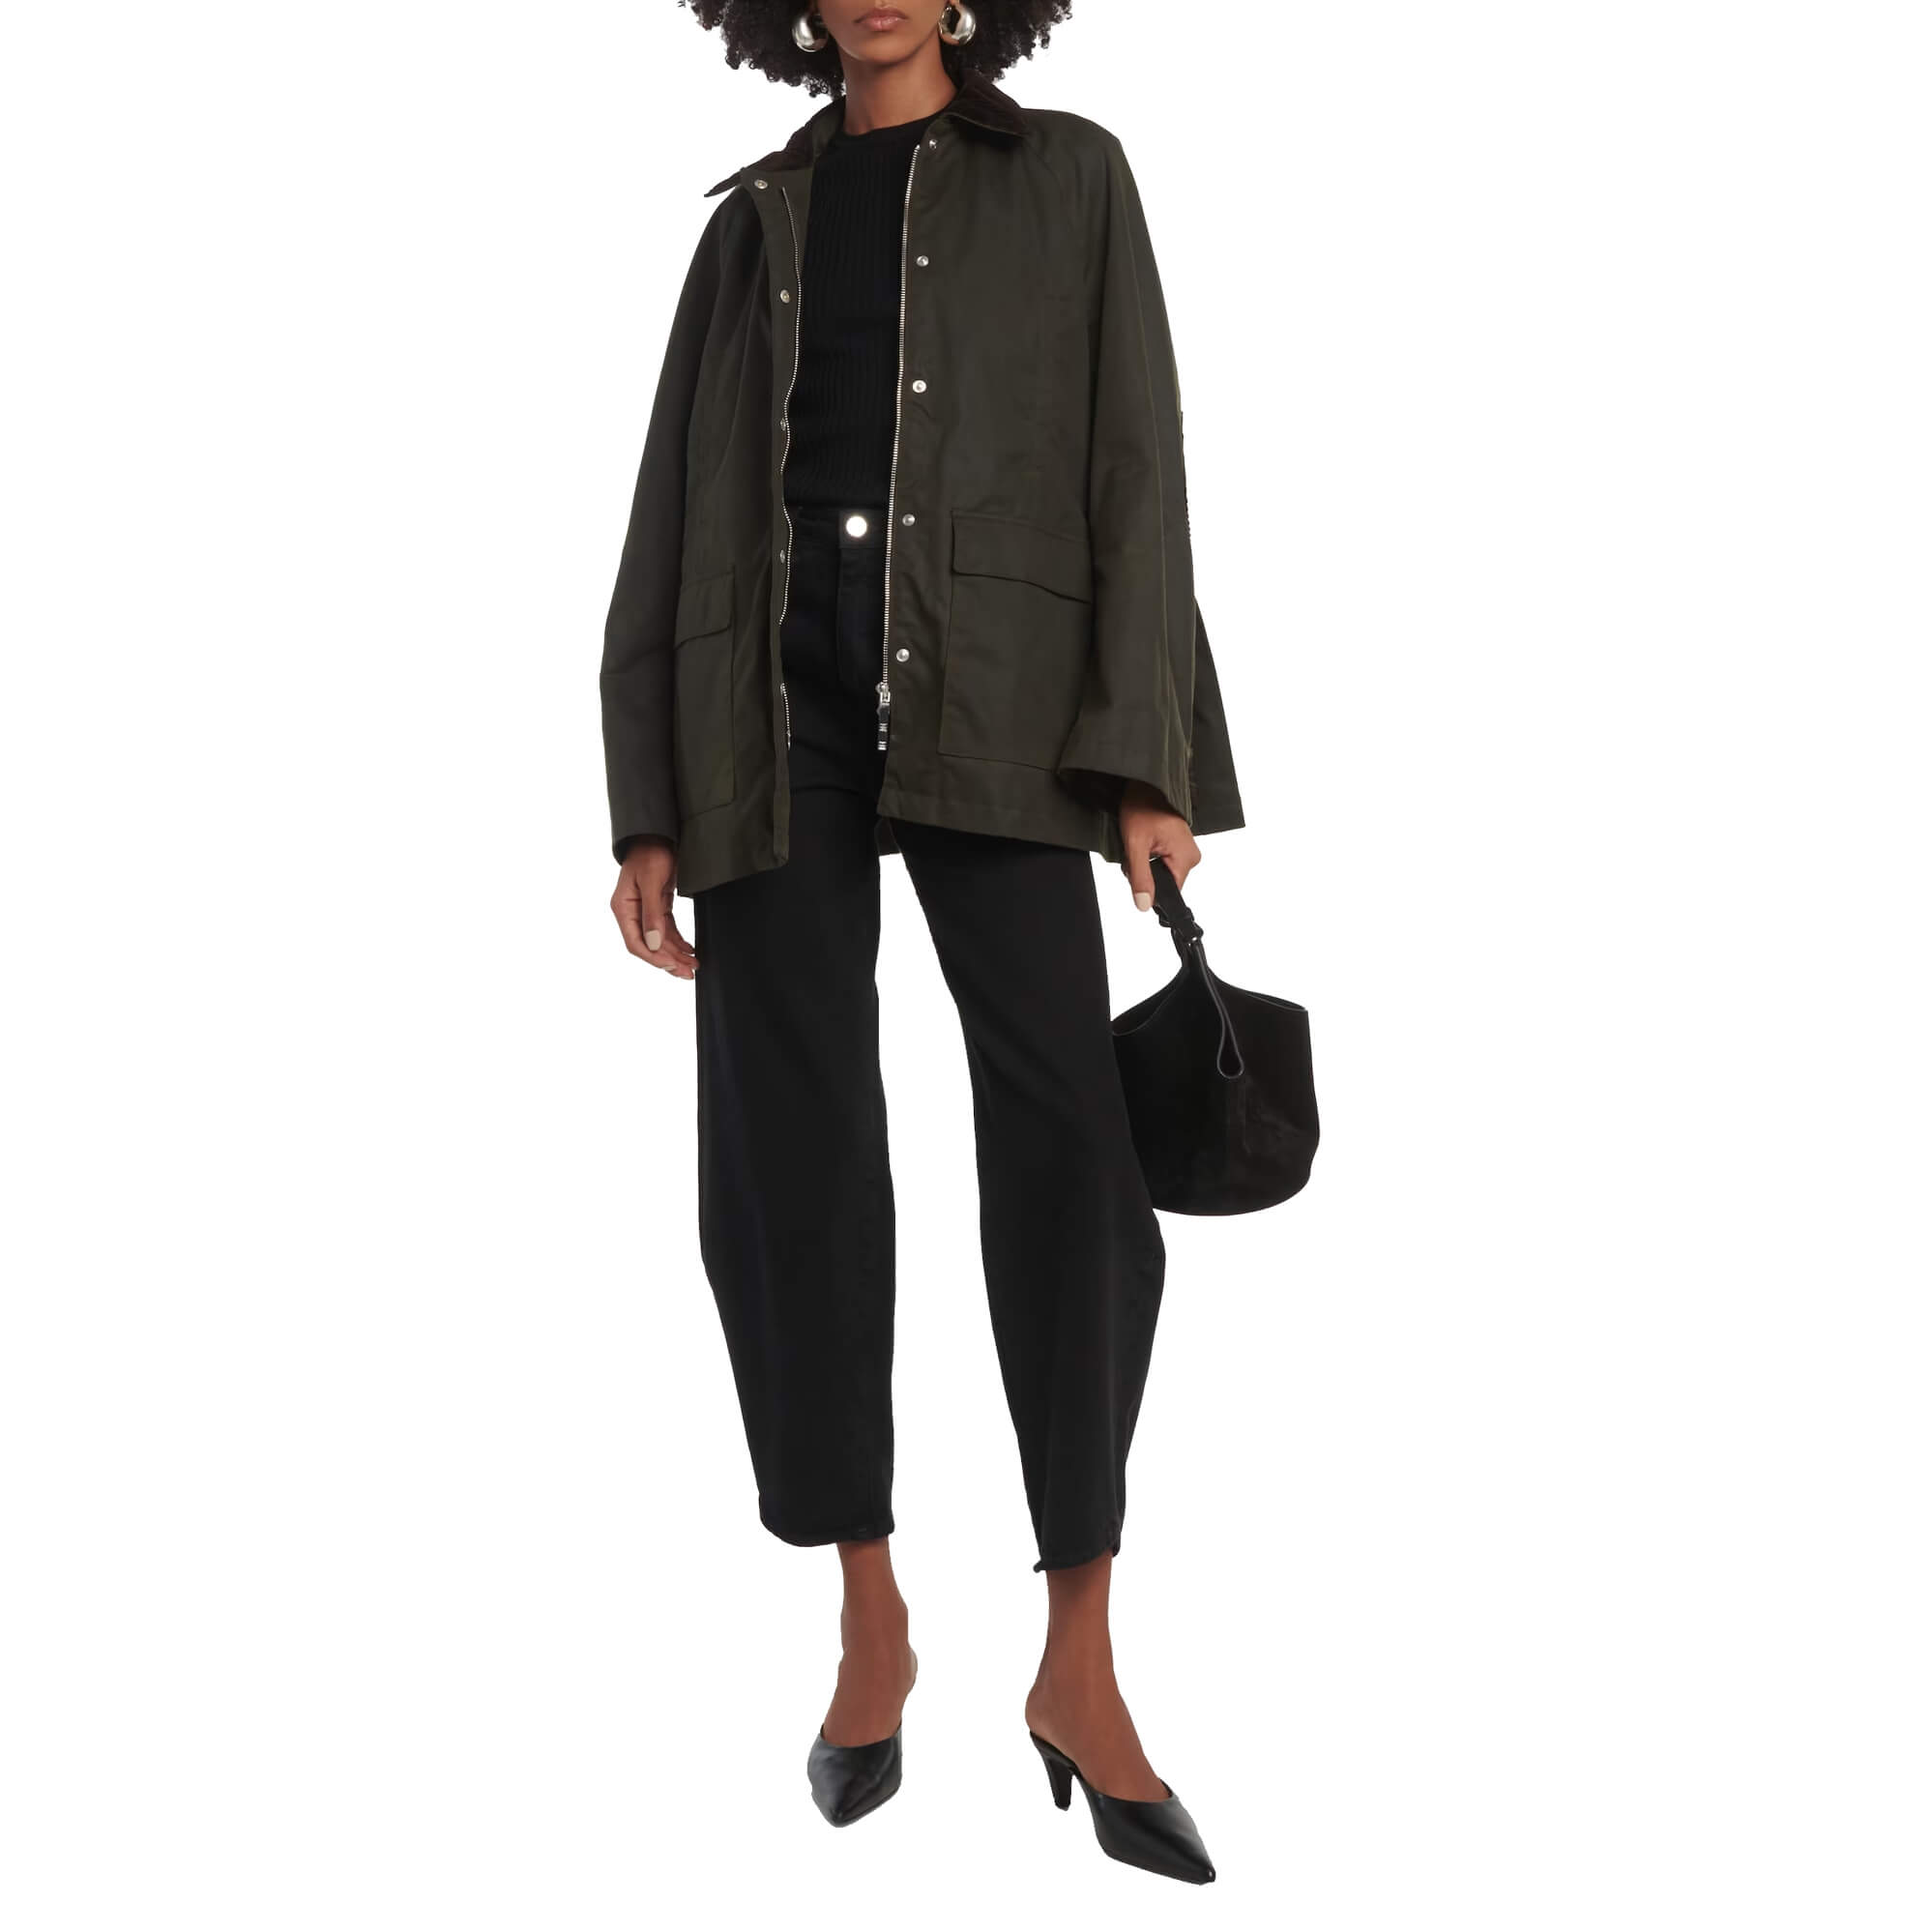 Toteme Country Oversized Elbow-Patch Jacket